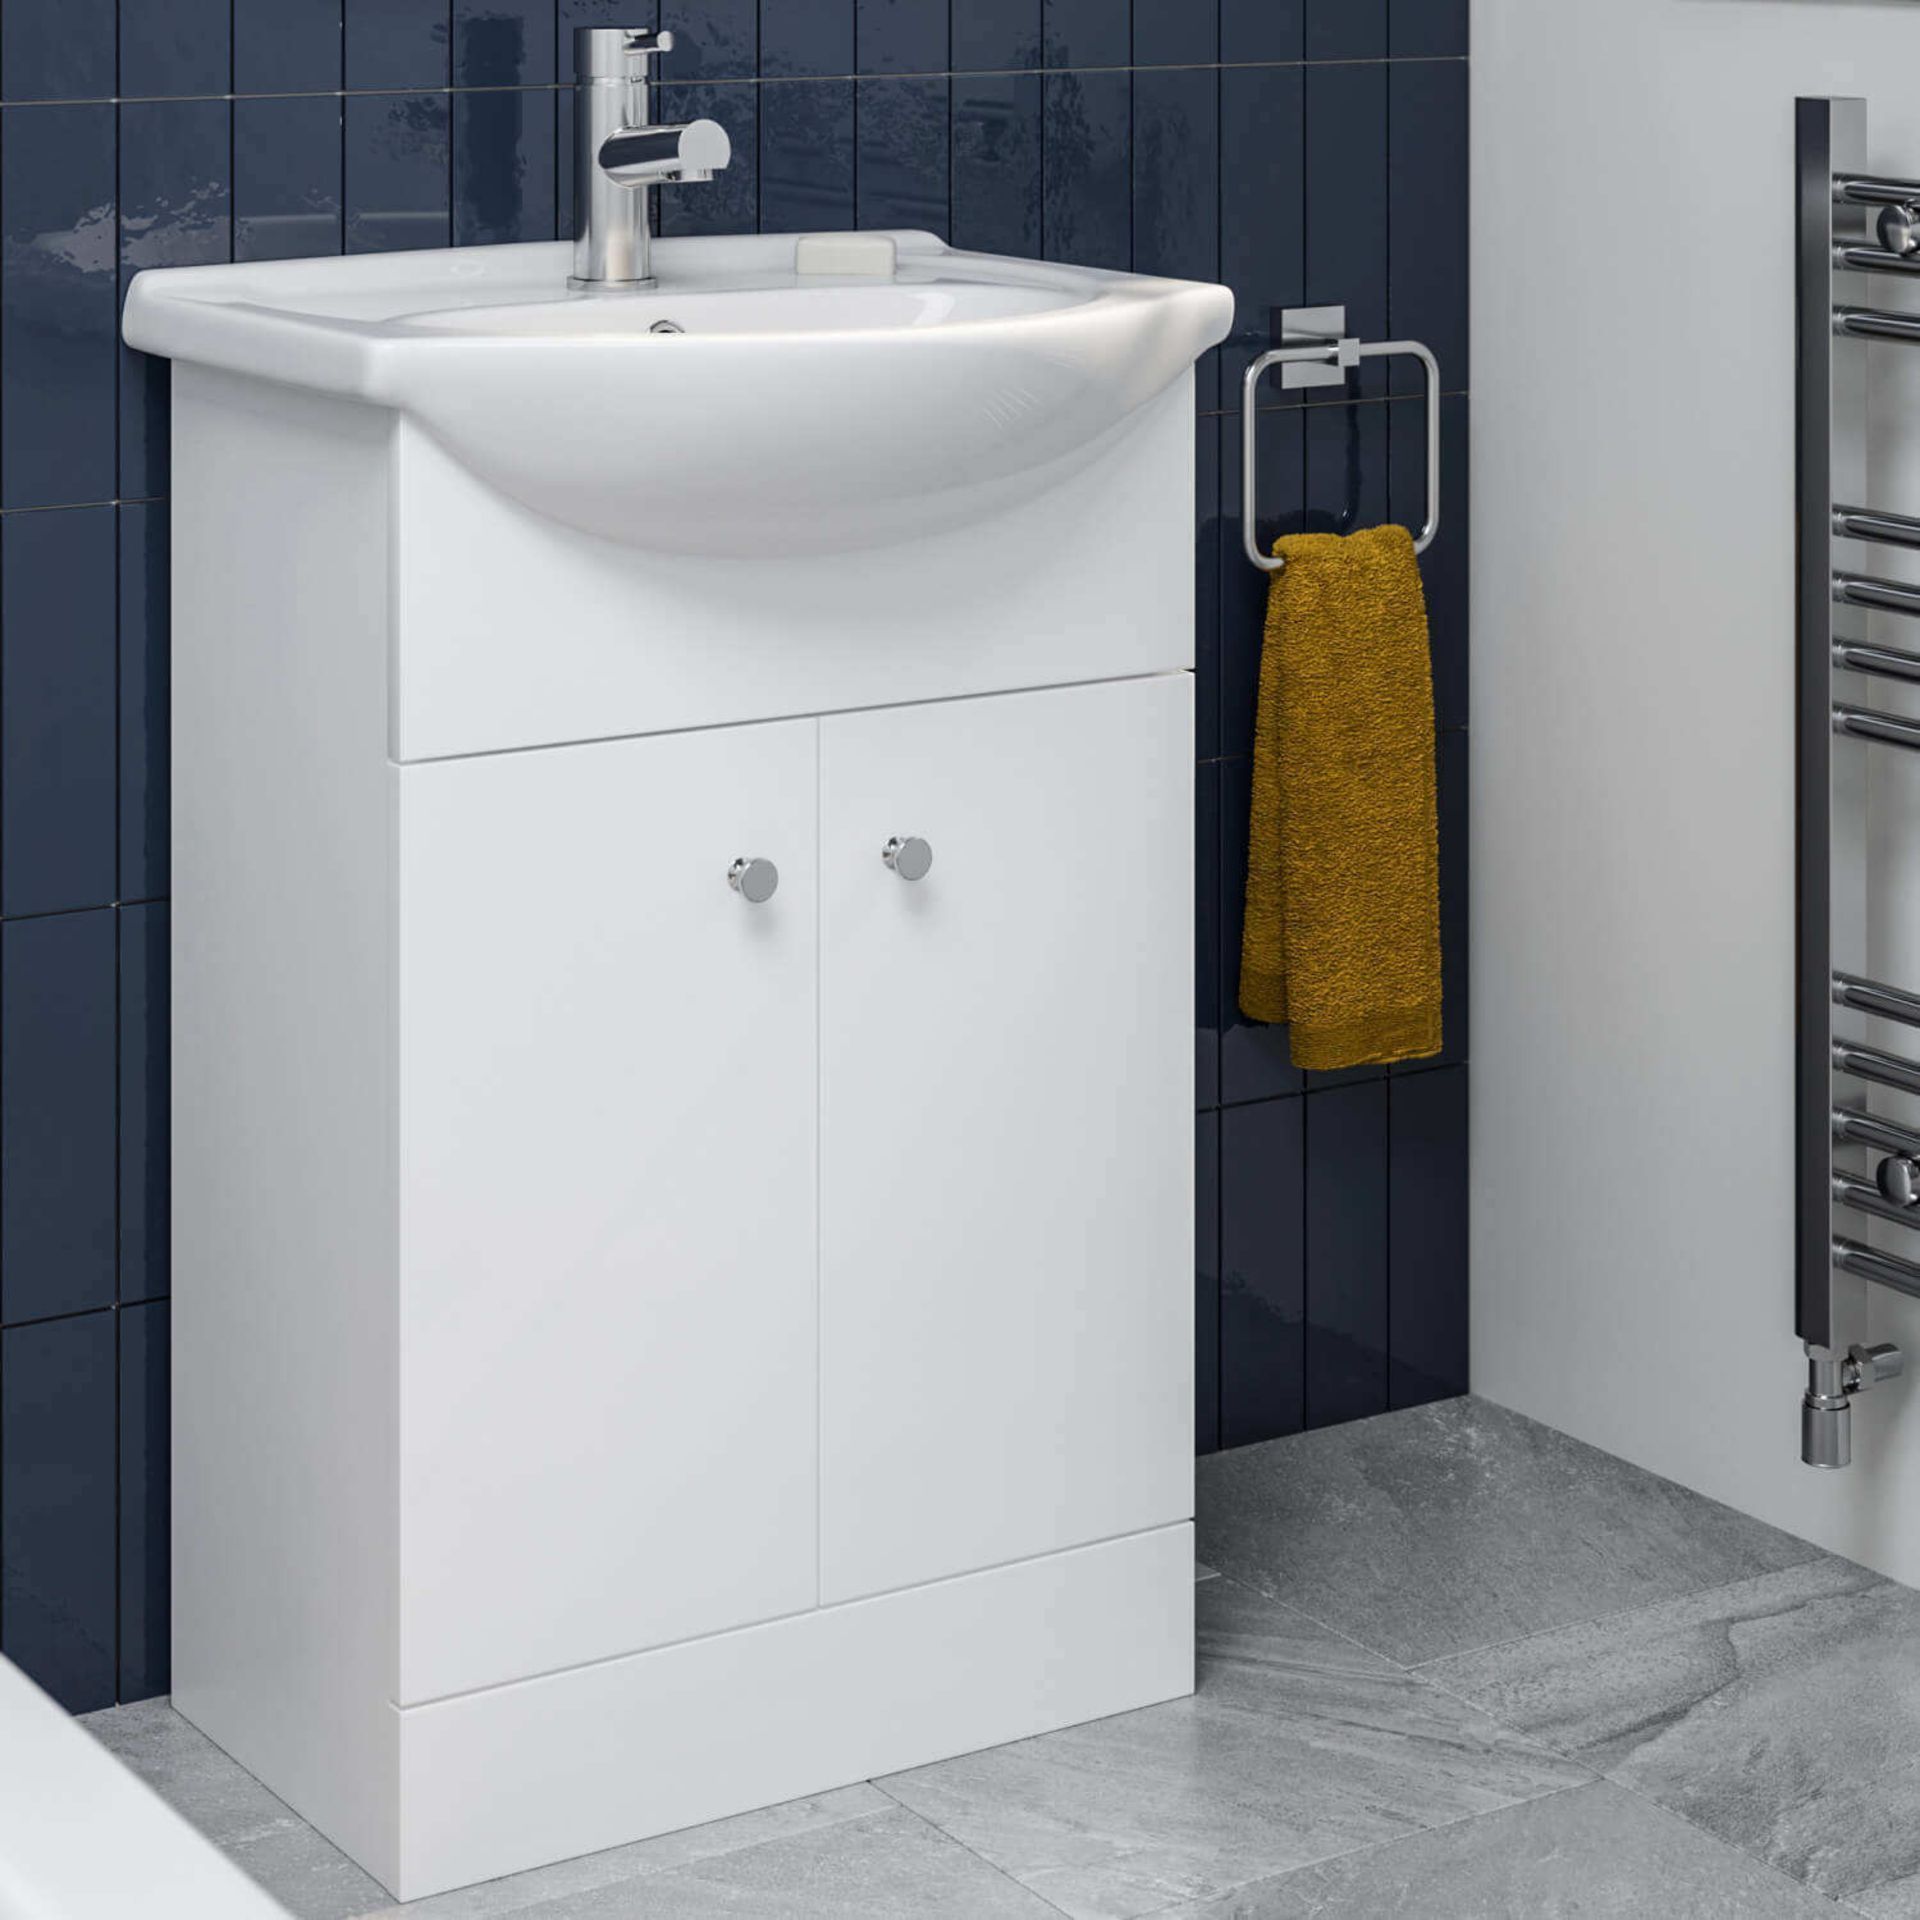 NEW & BOXED 550mm Quartz Basin Sink Vanity Unit Floor Standing White.RRP £349.99.Comes complet... - Image 2 of 2